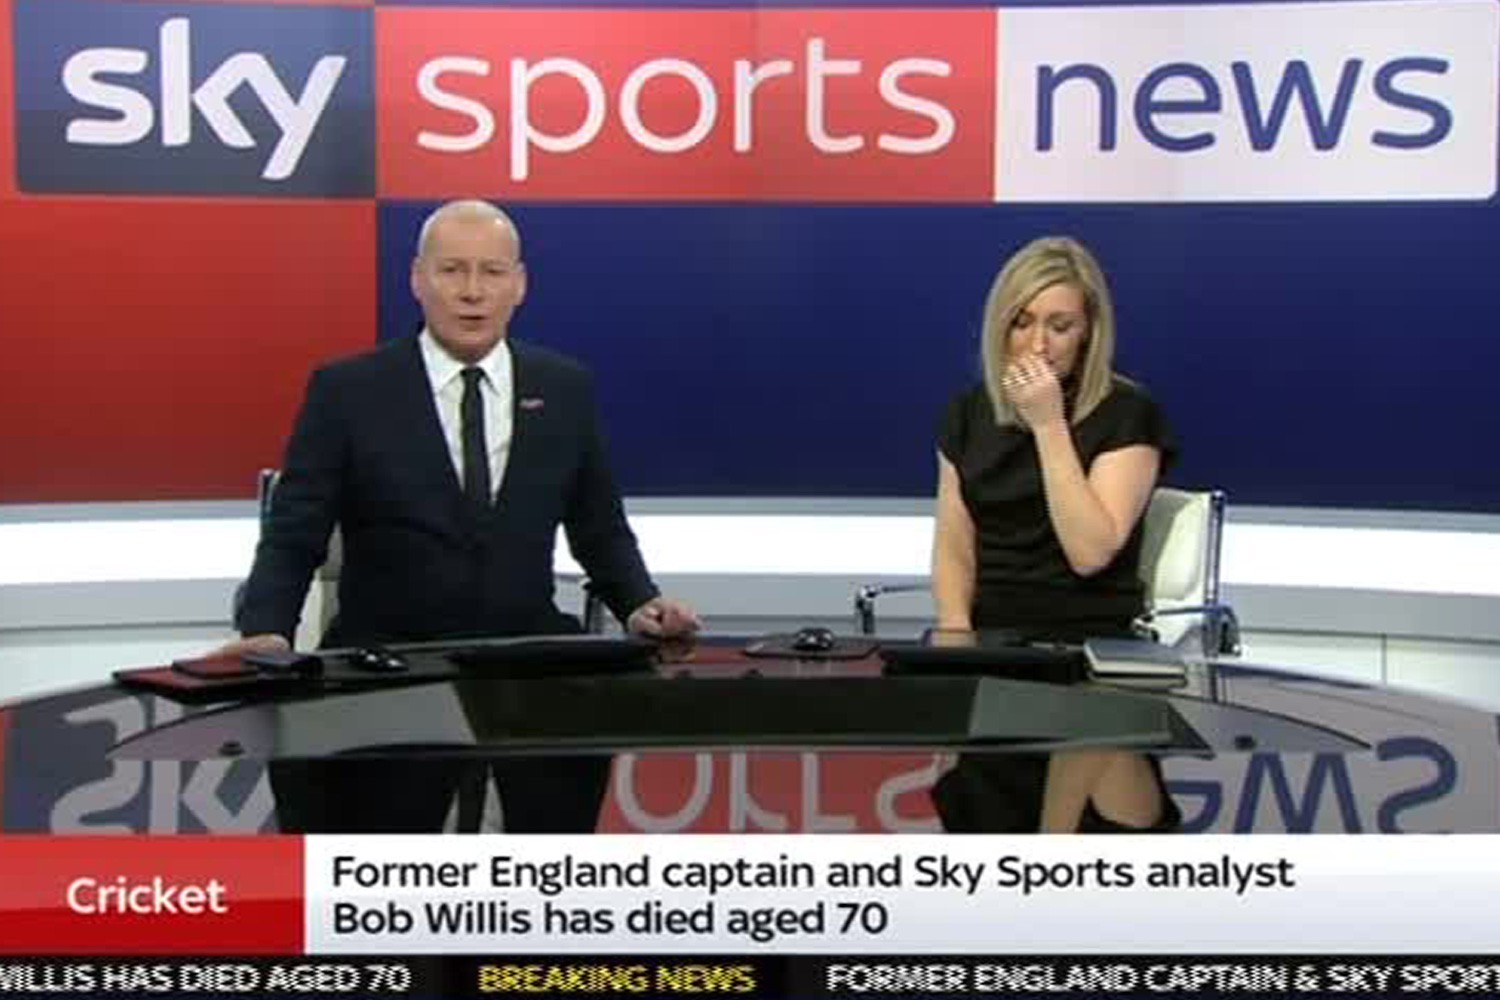 , Sky Sports presenter Vicky Gomersall breaks down in tears live on air after tragic news of Bob Willis death aged 70